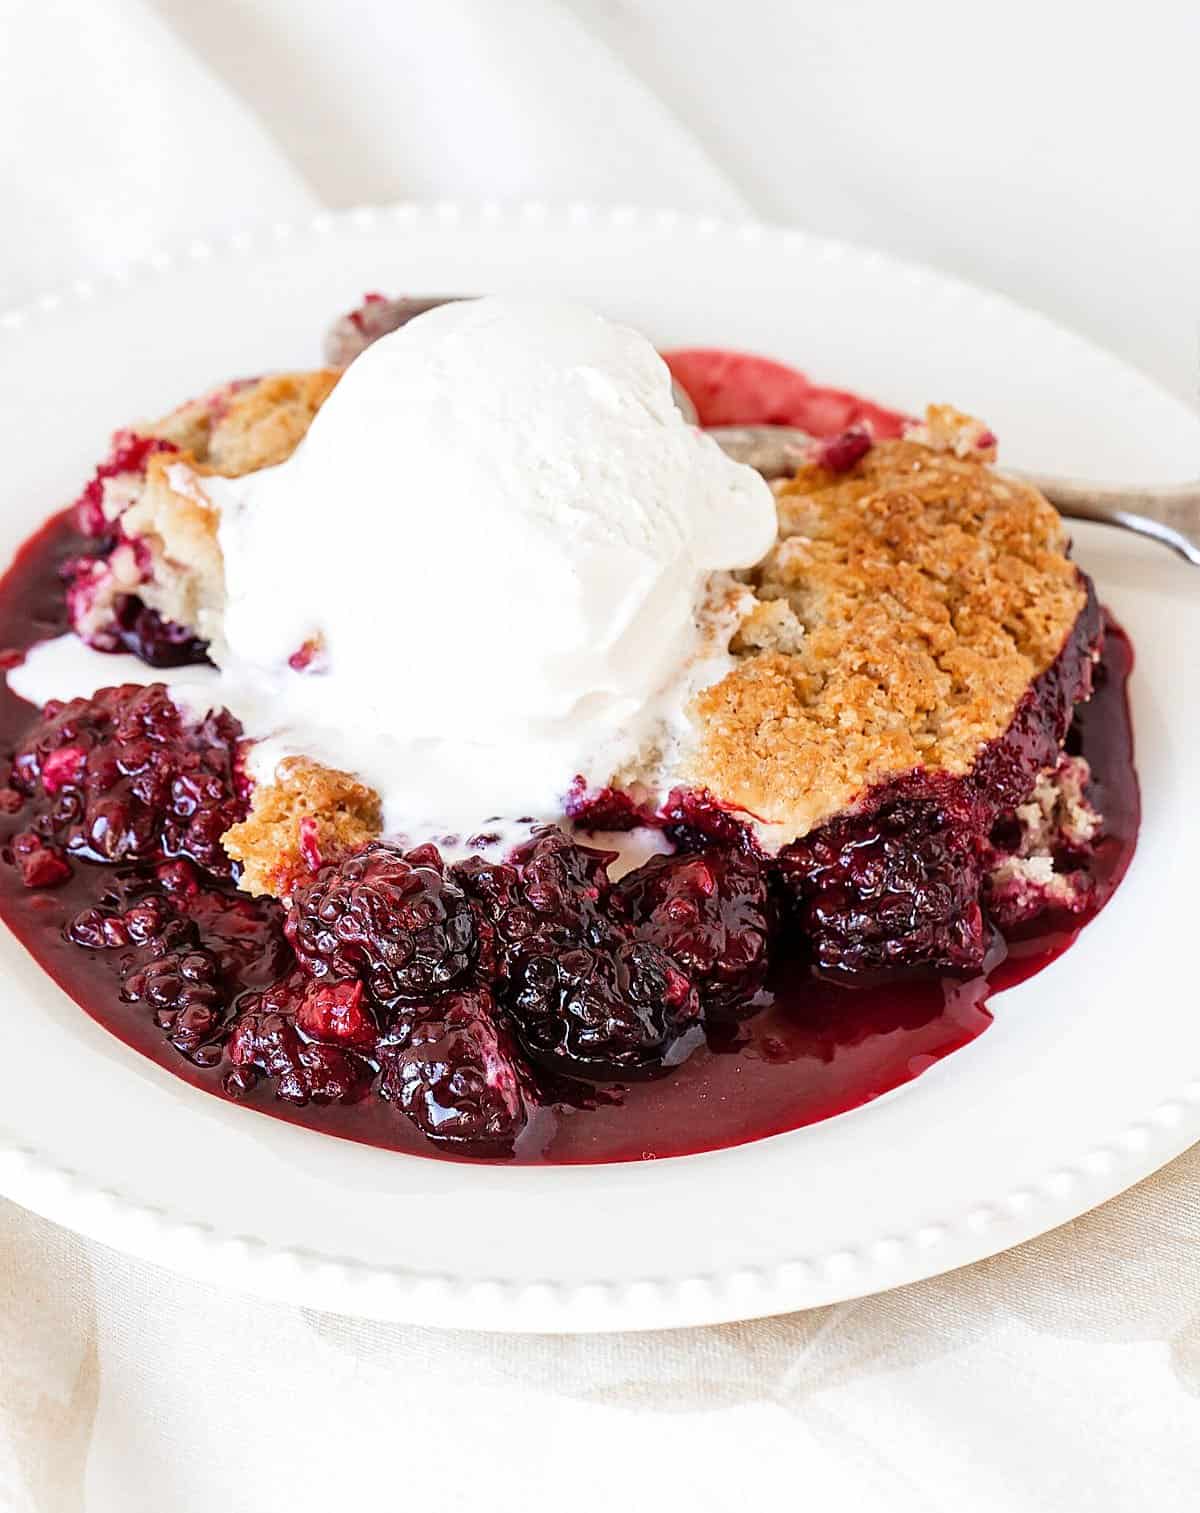 White plate with blackberry cobbler serving with ice cream, white background.